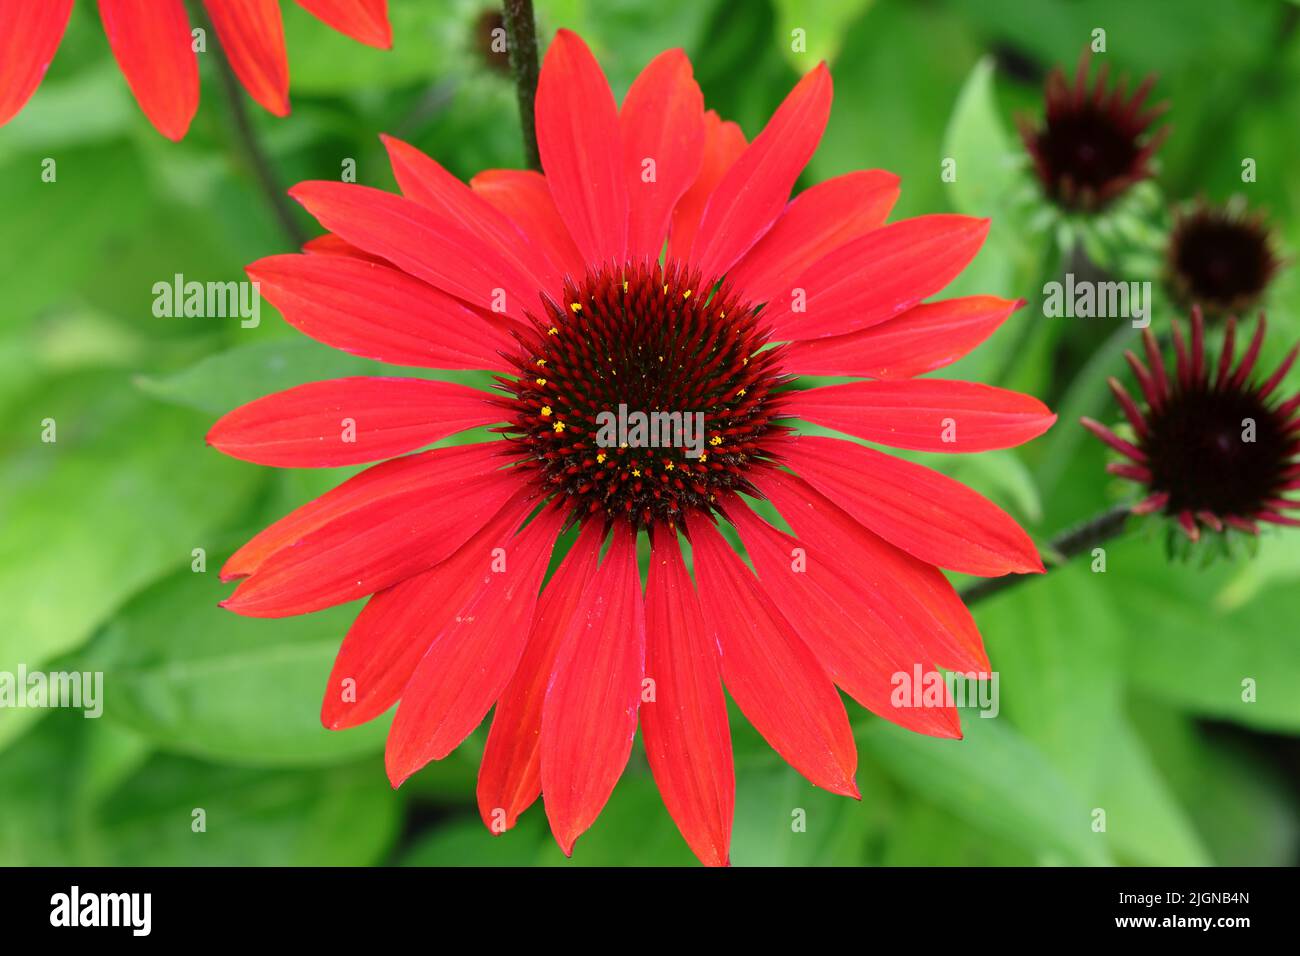 close-up of a fresh red echinacea purpurea flower, view from above Stock Photo